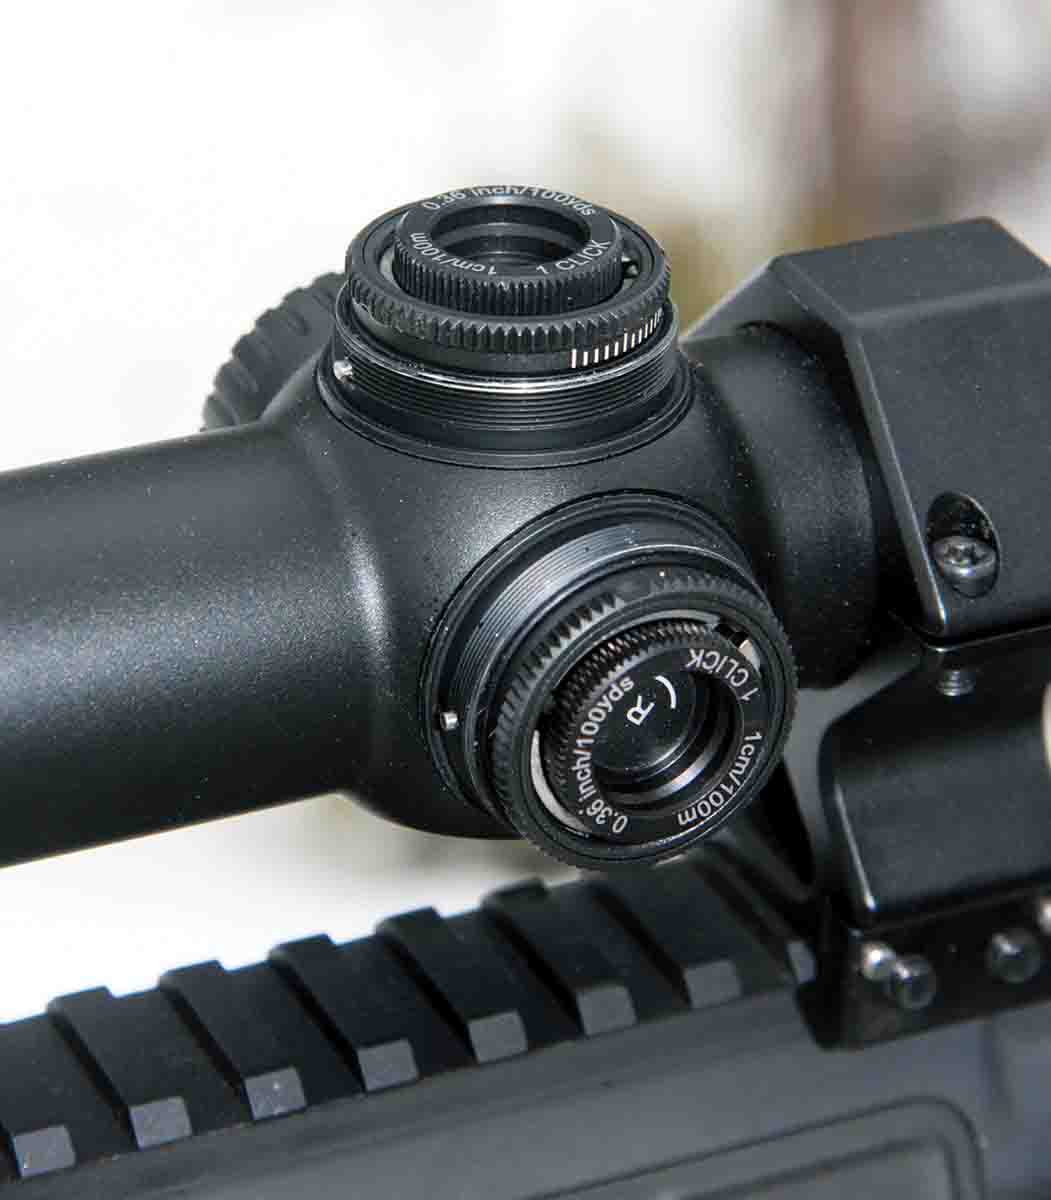 The Swarovski Z8i’s correction system includes metric movements, making it tricky for American shooters. The 10mm-per-click at 100 meters adjustment translate to an odd .36-inch-per-click at 100 yards.